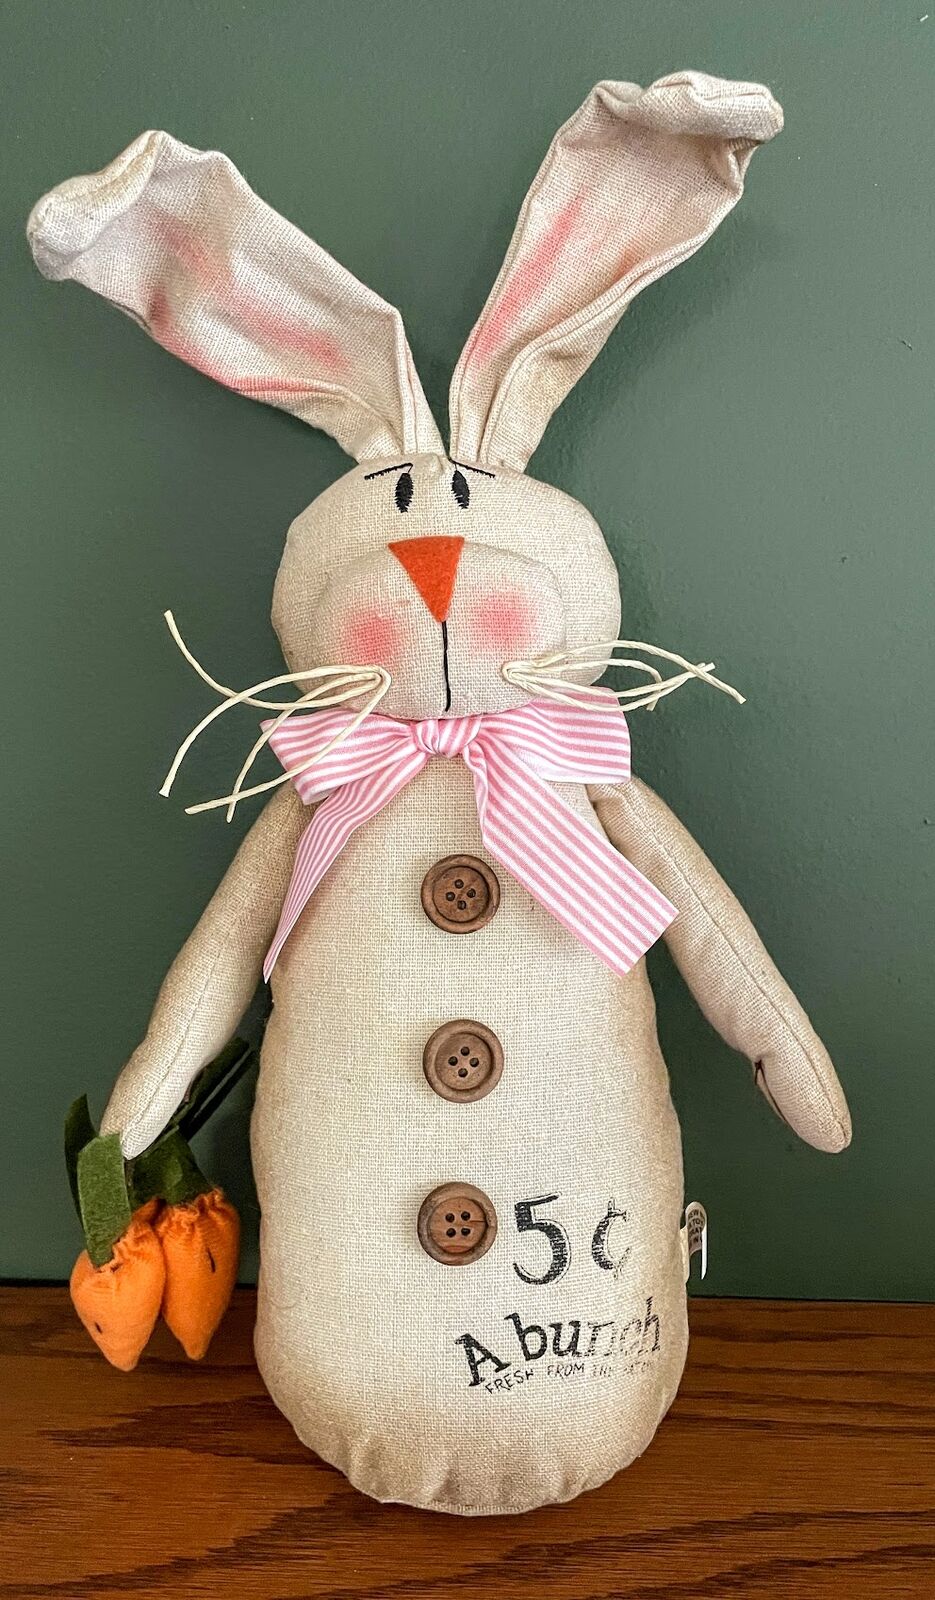 Primitive Country 18” Cheeky Bunny w/Carrots Doll - The Primitive Pineapple Collection